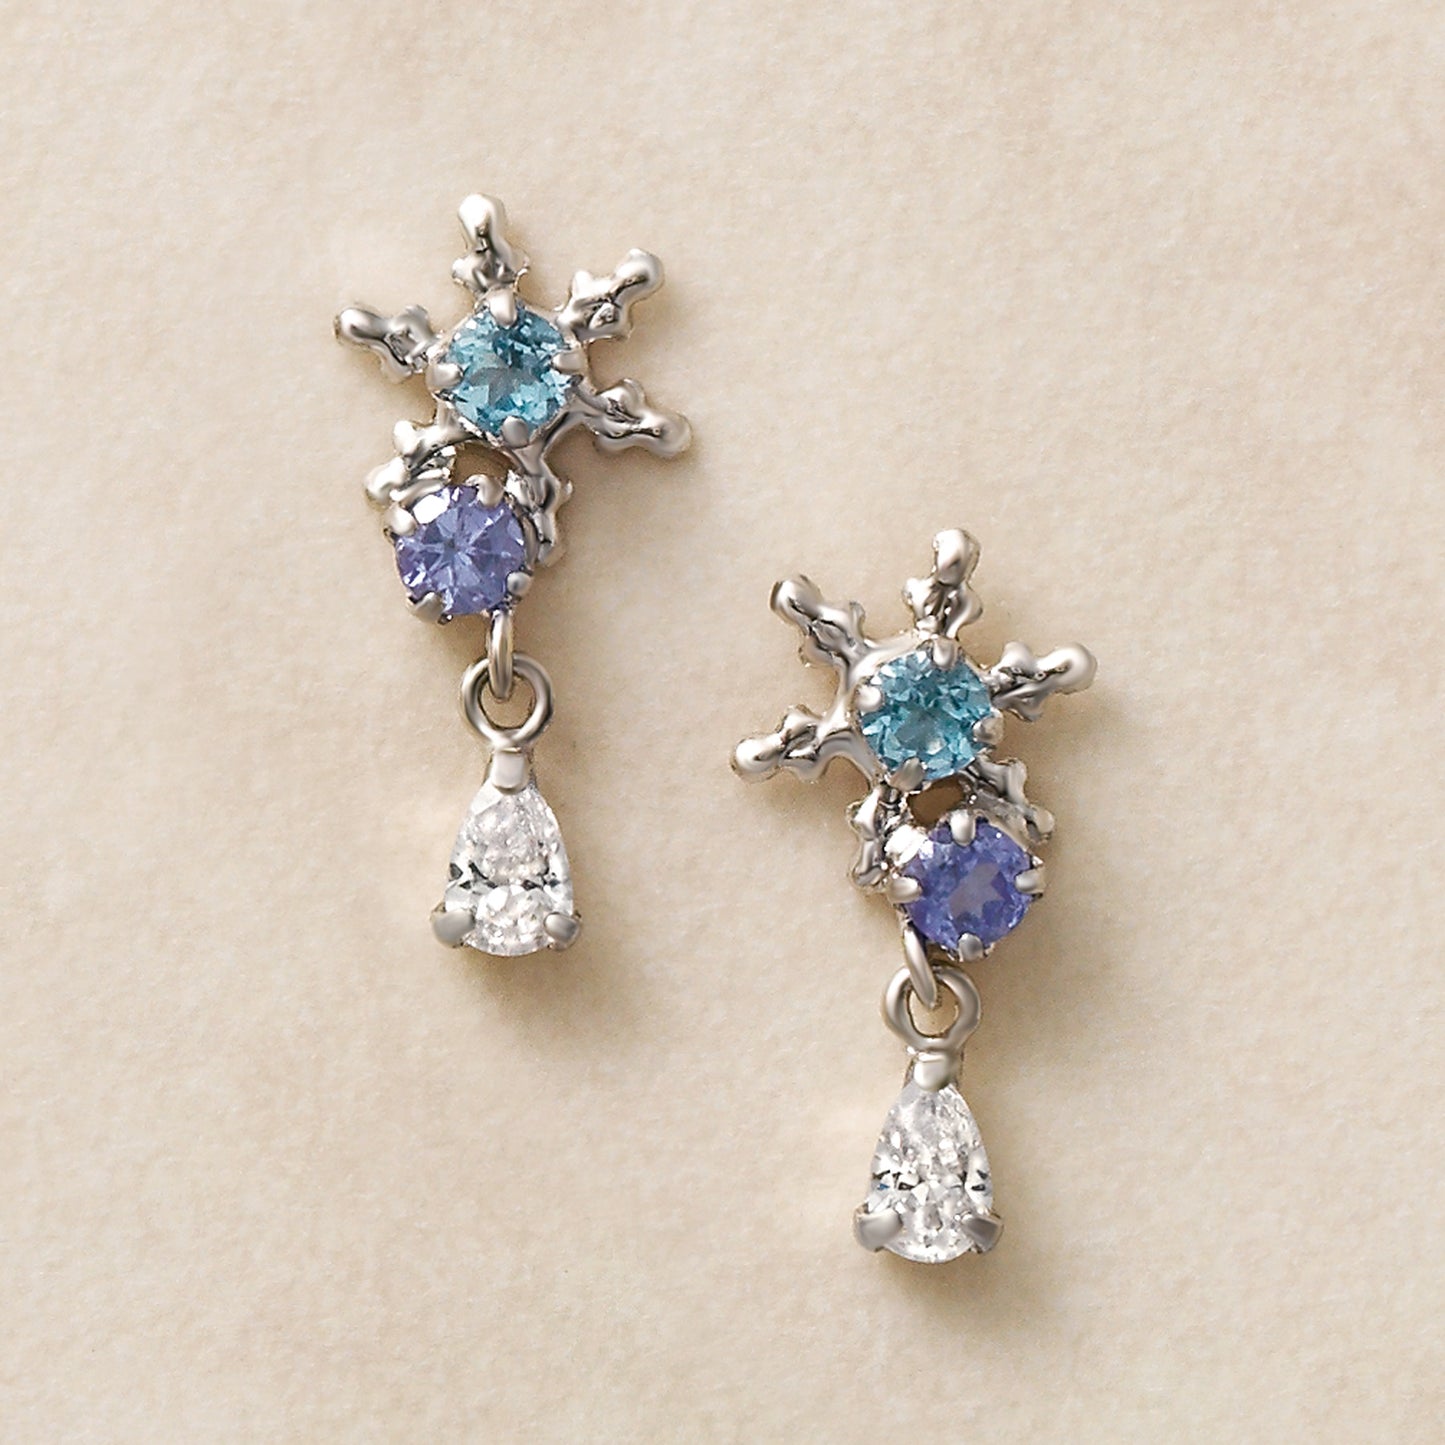 14K / 10K White Gold Tanzanite Snow Crystal Earrings - Product Image